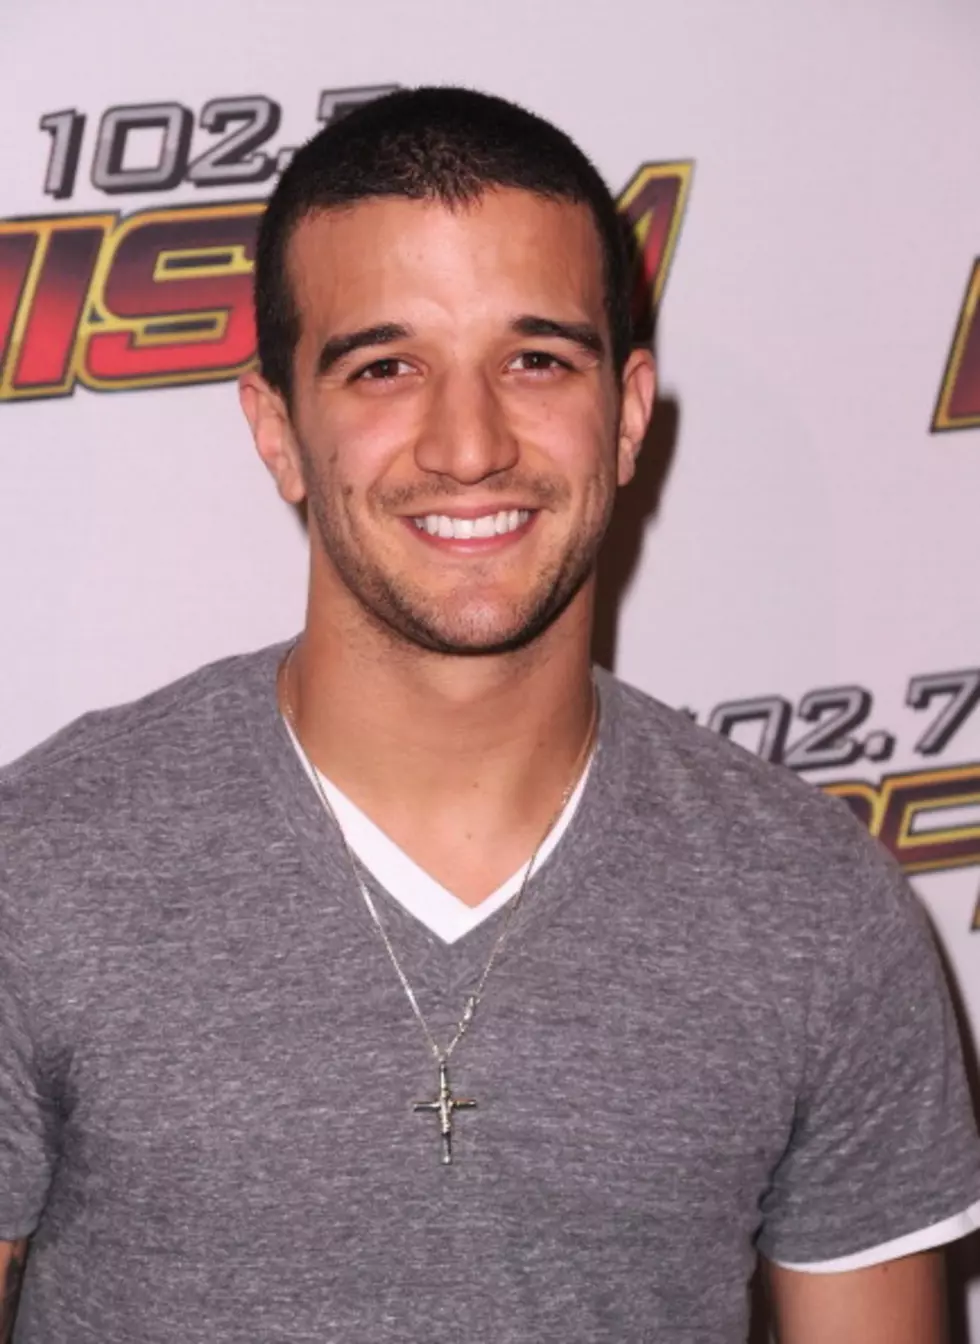 ‘Dancing With the Stars’ Mark Ballas & Tuesday’s Other Celebrity Birthdays